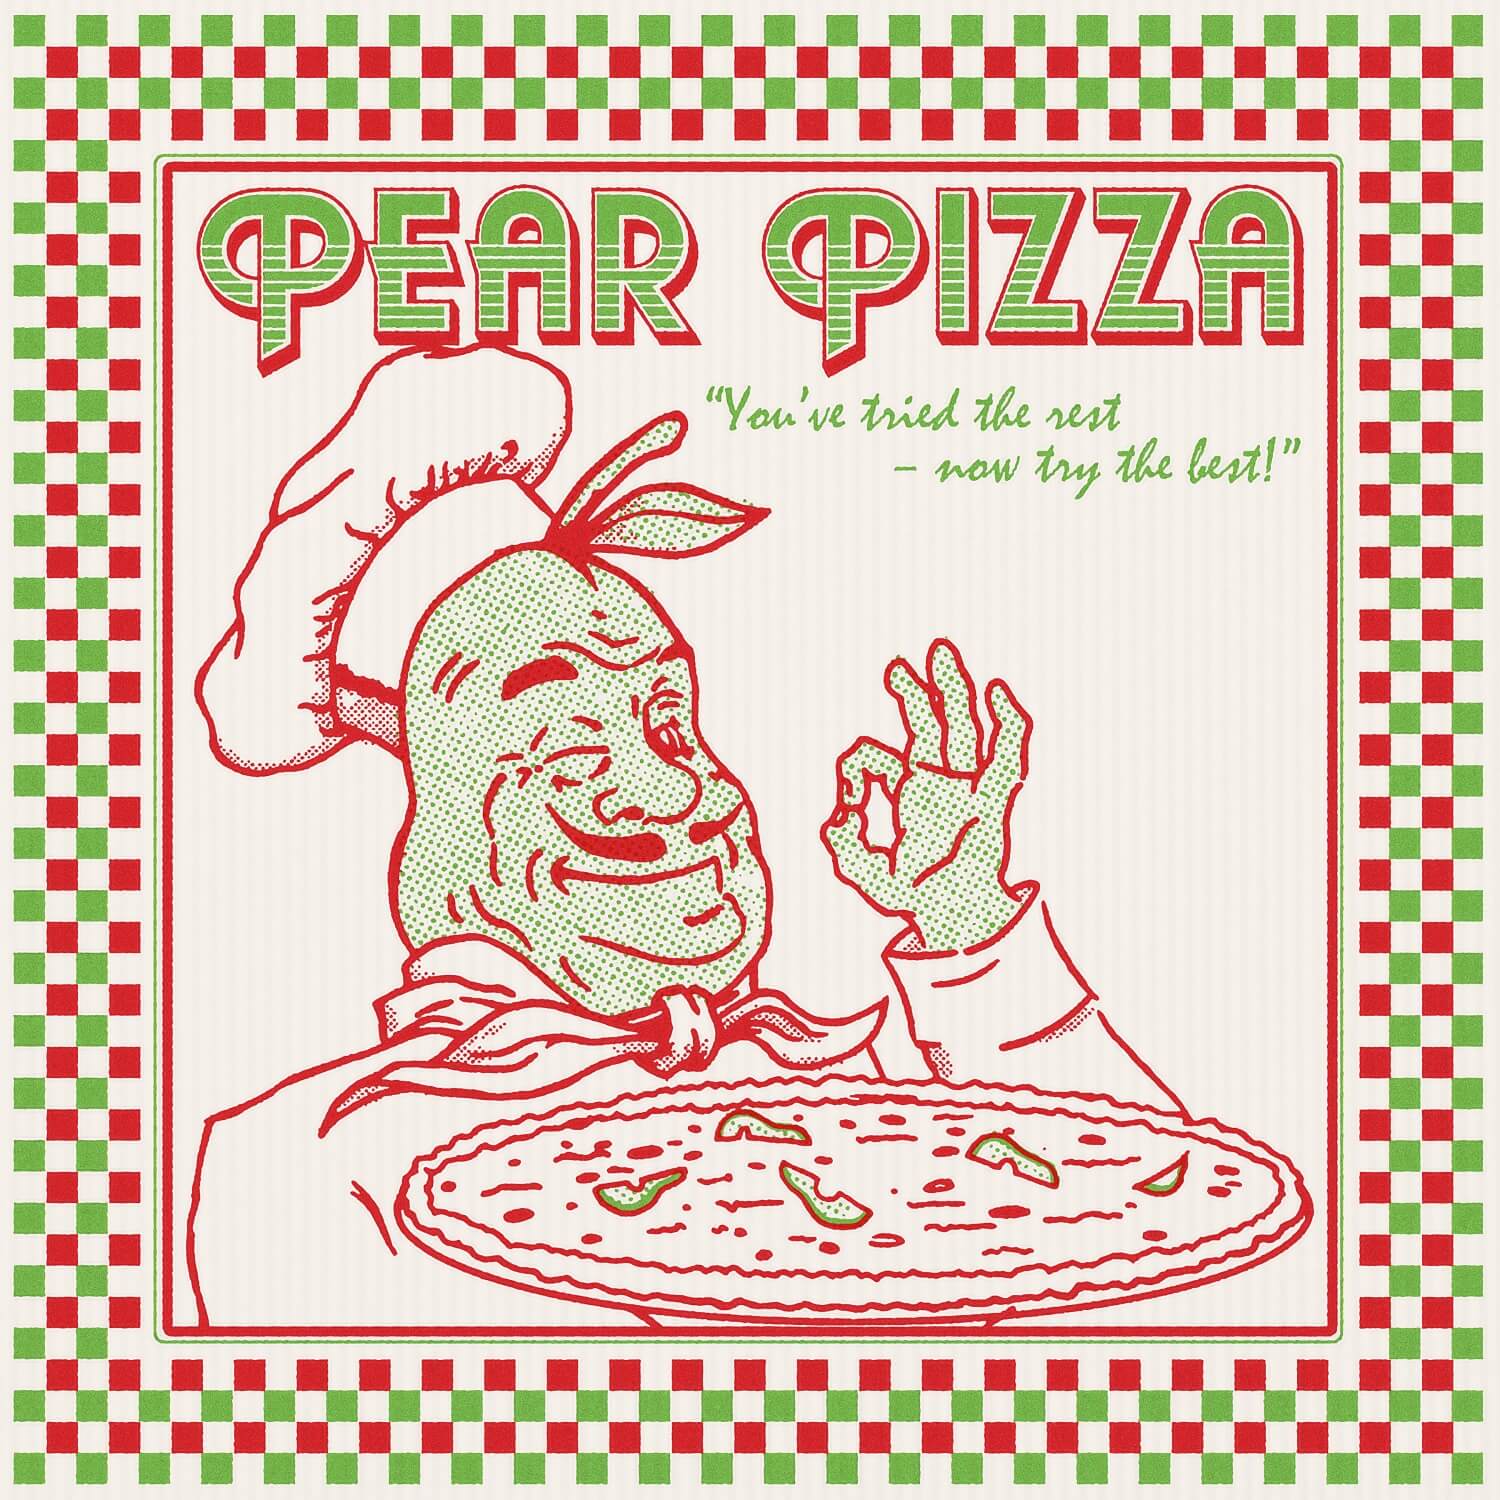 pear pizza image